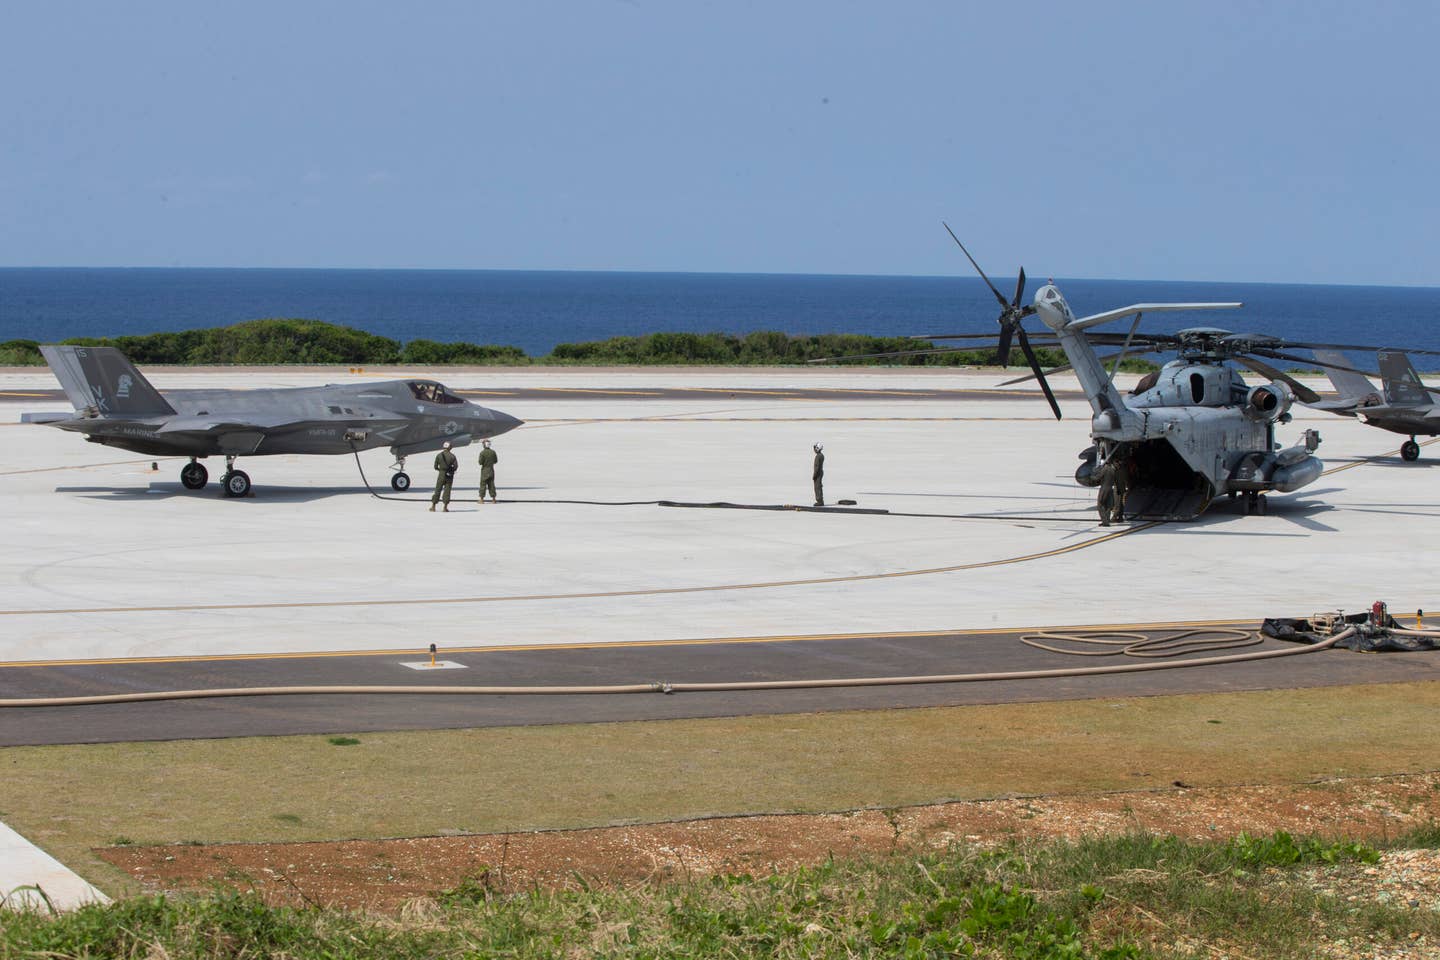 An F-35B Lightning II fighter aircraft with Marine Fighter Attack Squadron 121 refuels at an established Forward Arming and Refueling Point during simulated Expeditionary Advanced Base Operations at Ie Shima Training Facility, March 14, 2019. (U.S. Marine Corps photo by Lance Cpl. Dylan Hess)